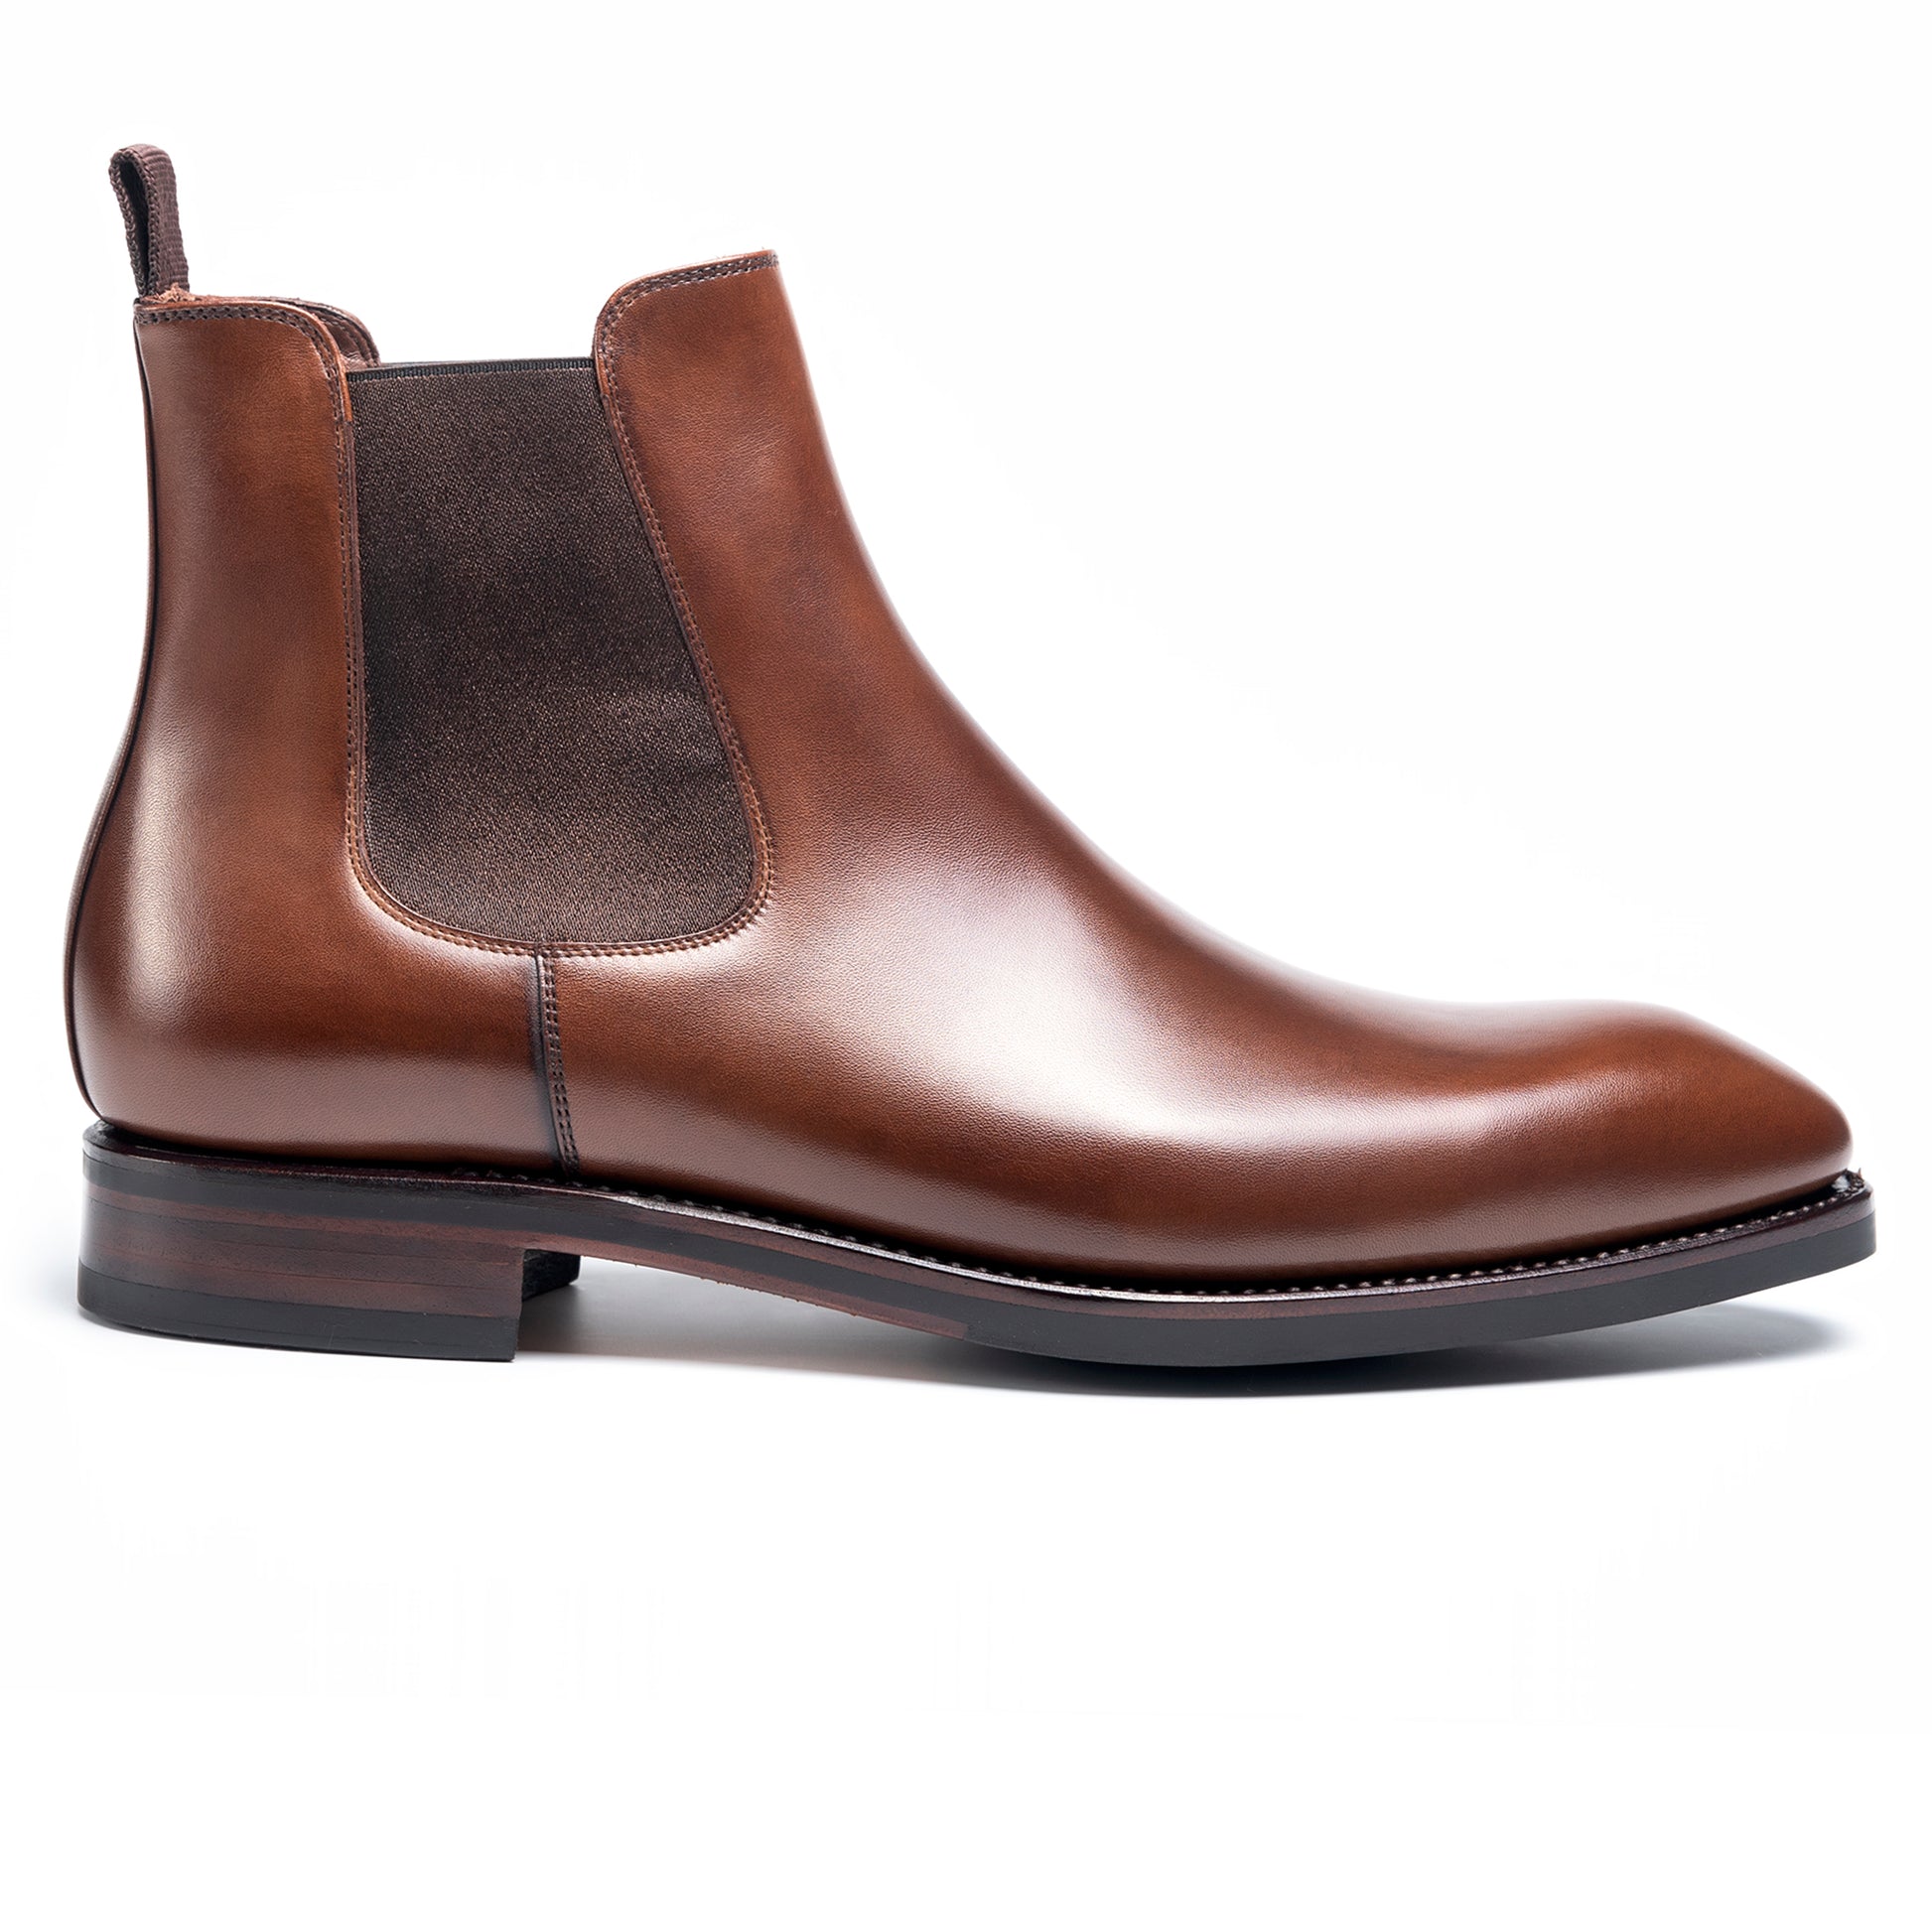 TLB Mallorca leather shoes 511 / ALAN / VEGANO BROWN